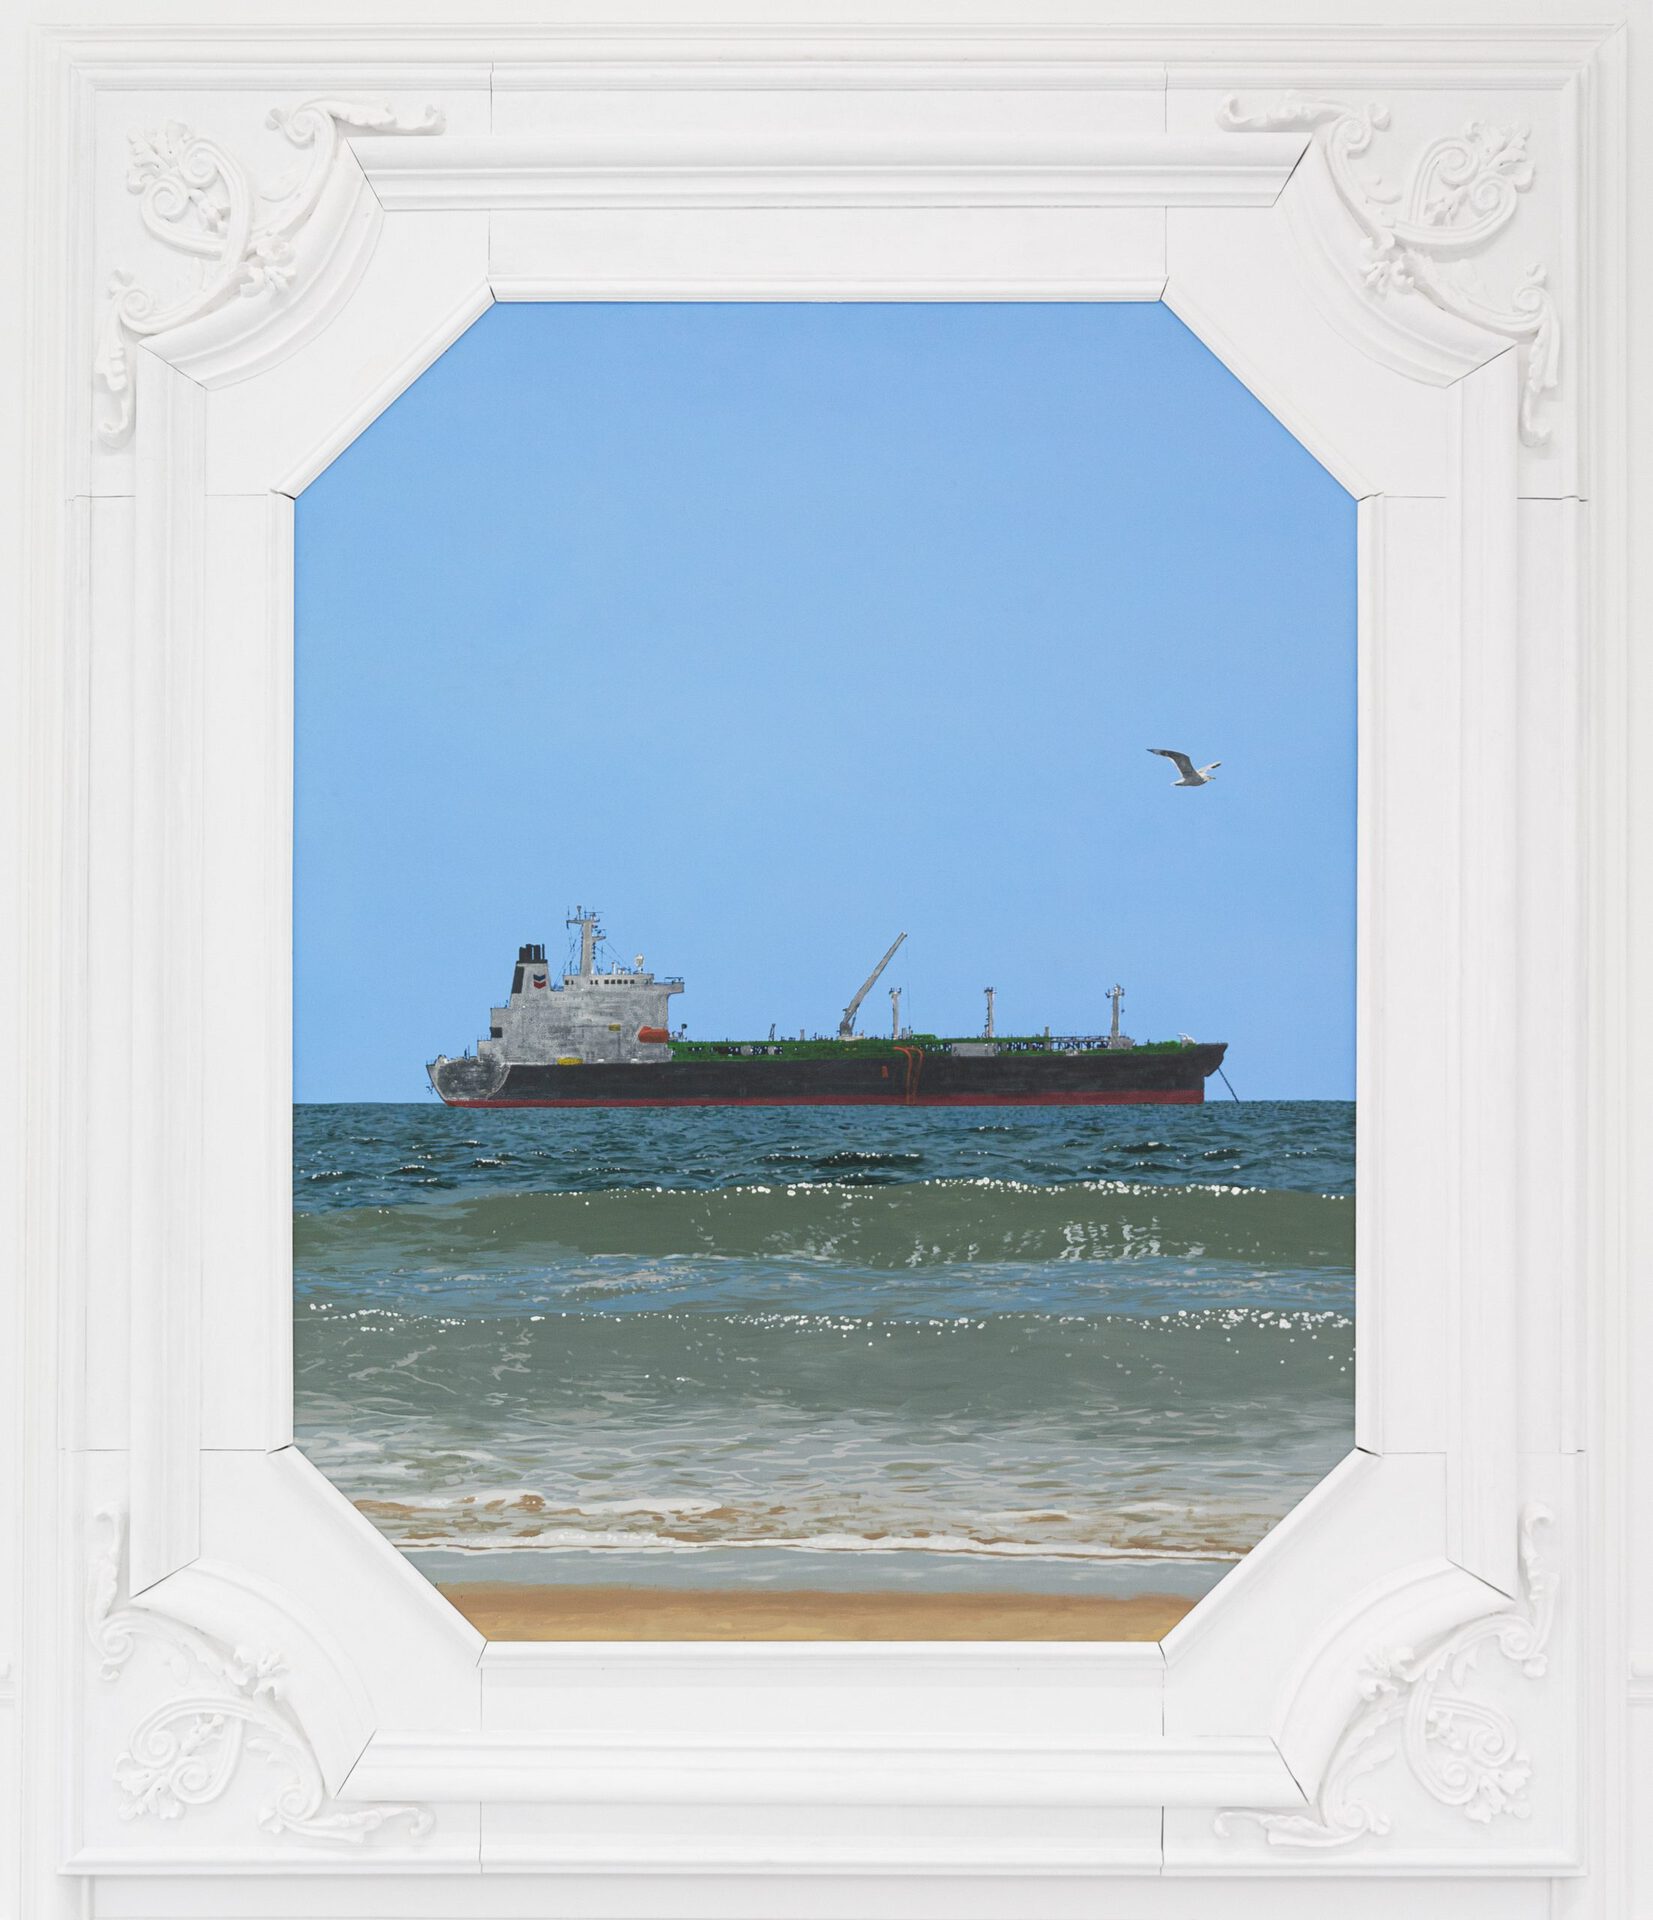 Pentti Monkkonen, Oil Tanker, 2021 Oil on canvas mounted on wood in artist frame 272 x 231 x 7 cm (107 1/8 x 91 x 2 3/4 in). Courtesy of the artist and High Art